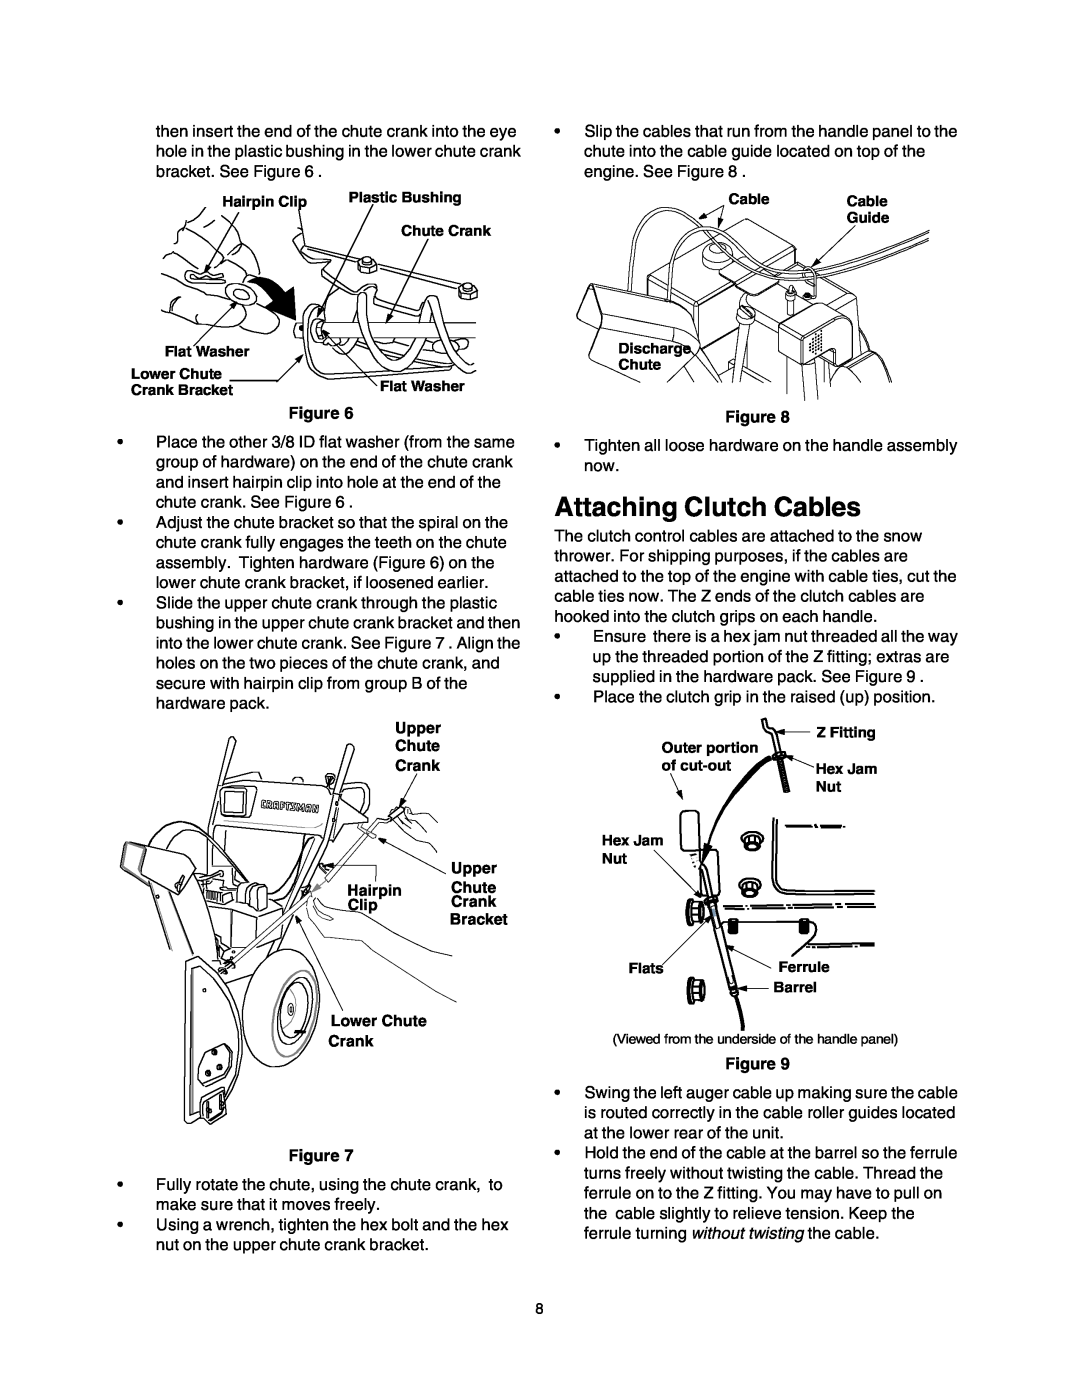 Sears 247.88853 owner manual Attaching Clutch Cables, Upper Chute Crank Upper Hairpin Chute ClipCrank Bracket Lower Chute 